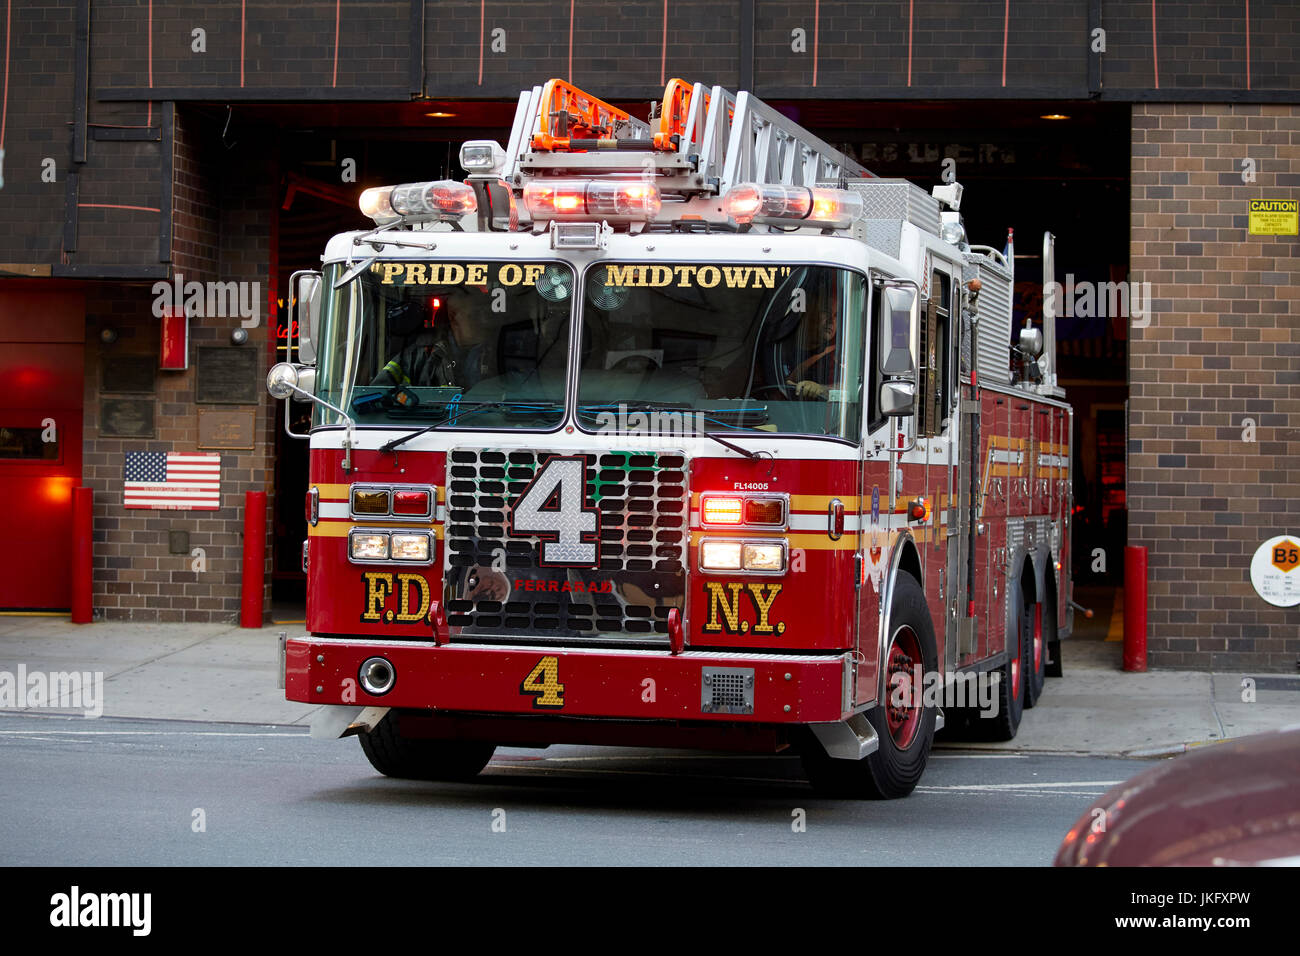 New York City, Manhattan, FDNY Pride of midtown Engine 54 Ladder 4 Battalion 9 on 8Th Avenue fire engine  leaving for an emergency fire Stock Photo